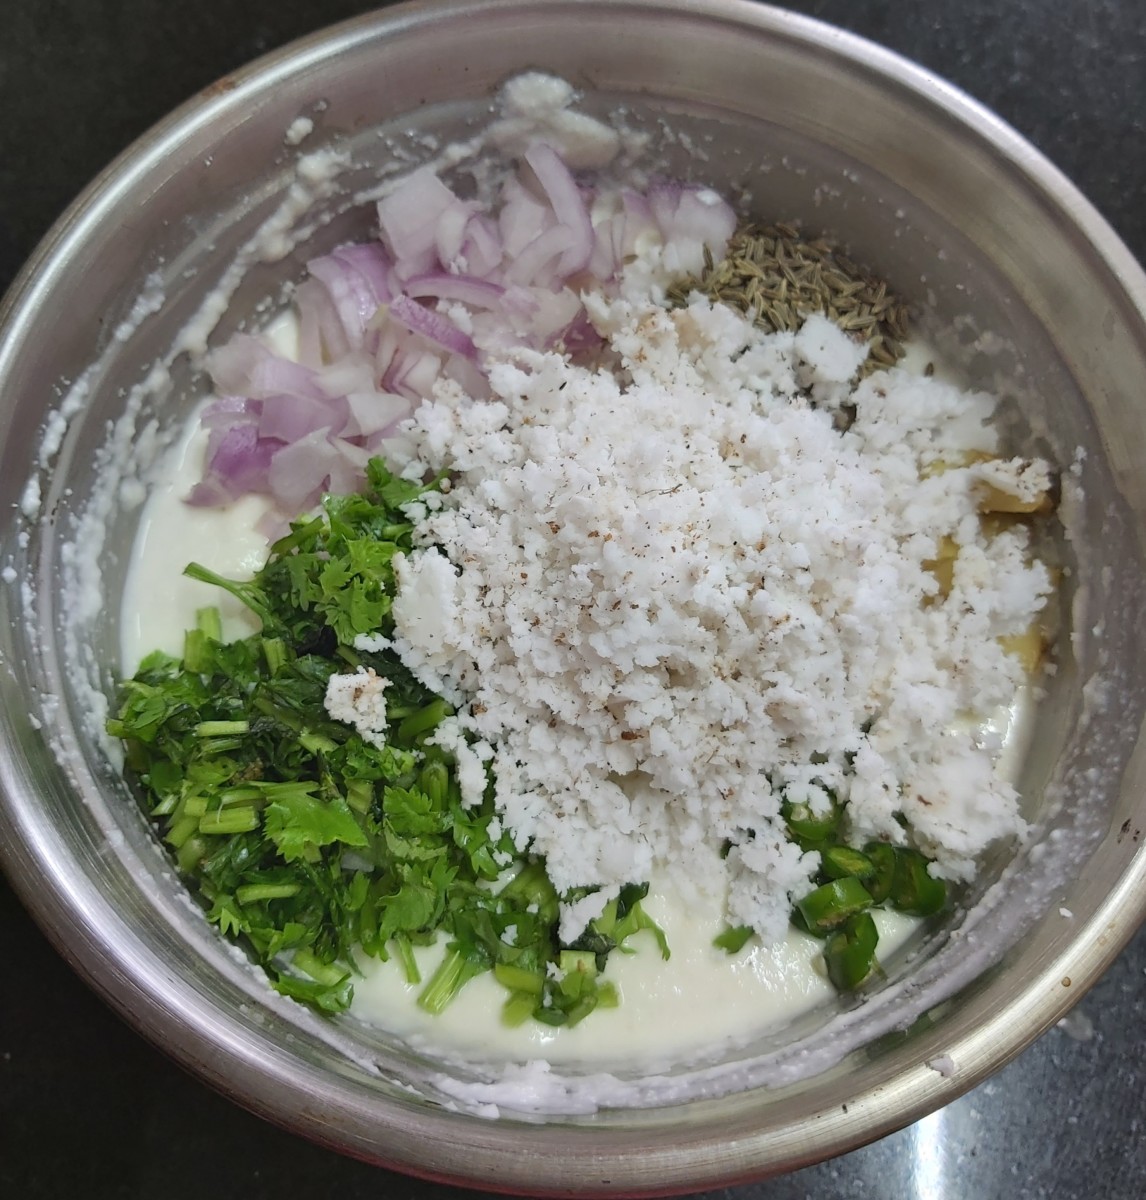 Add 3-4 tablespoons of grated fresh coconut.